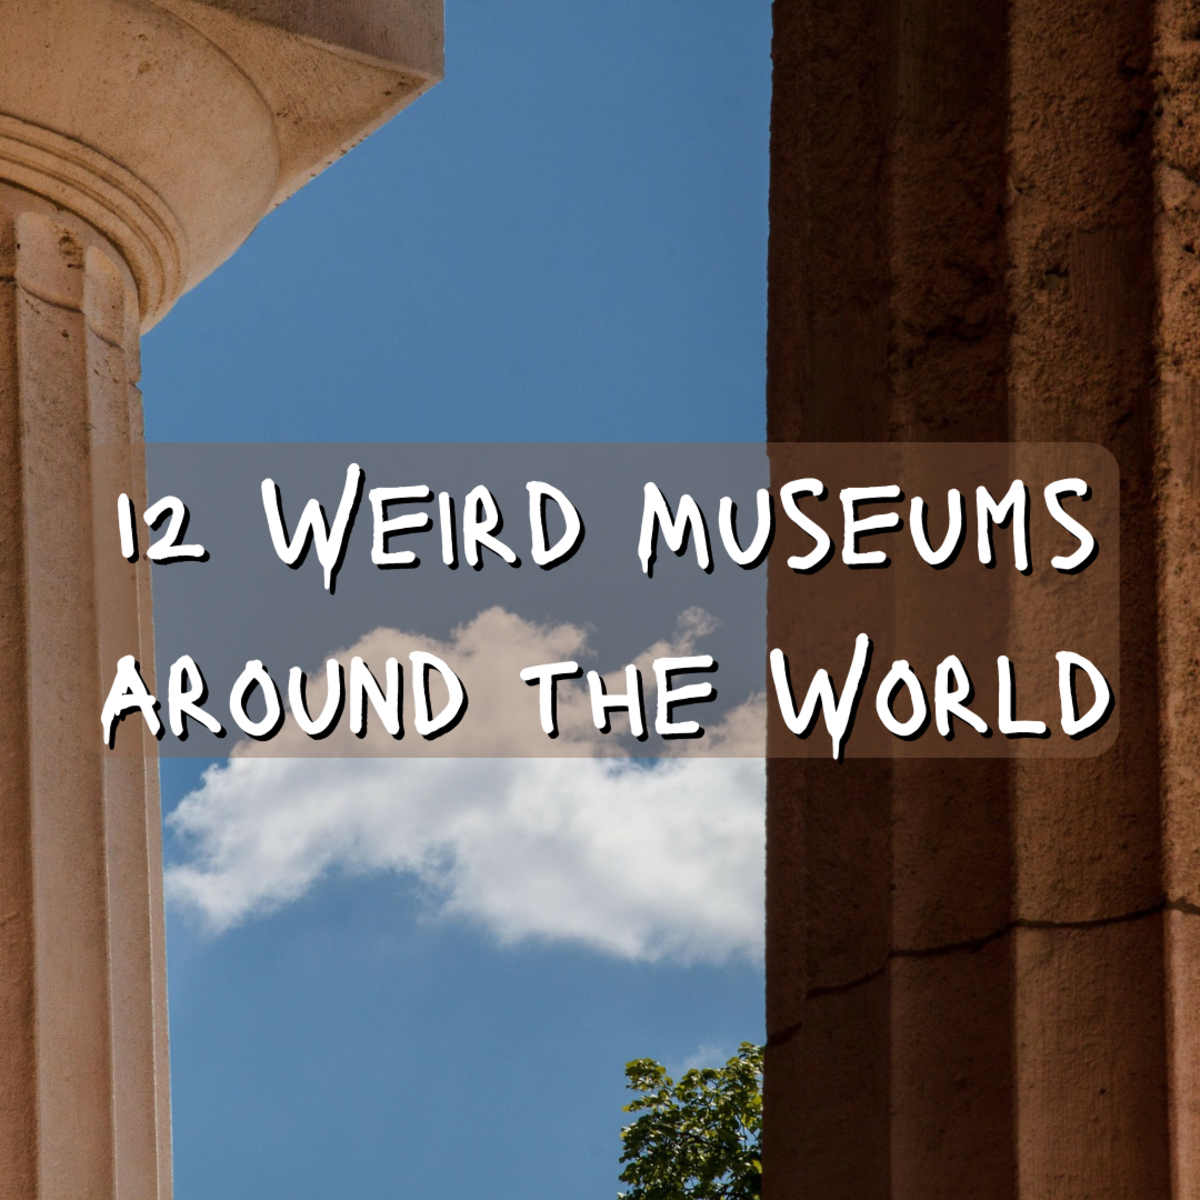 Read on to learn about 12 of the world's most bizarre museums. Covering food, poop, and everything in between, these are truly some of the world's strangest galleries, menageries, and exhibits.